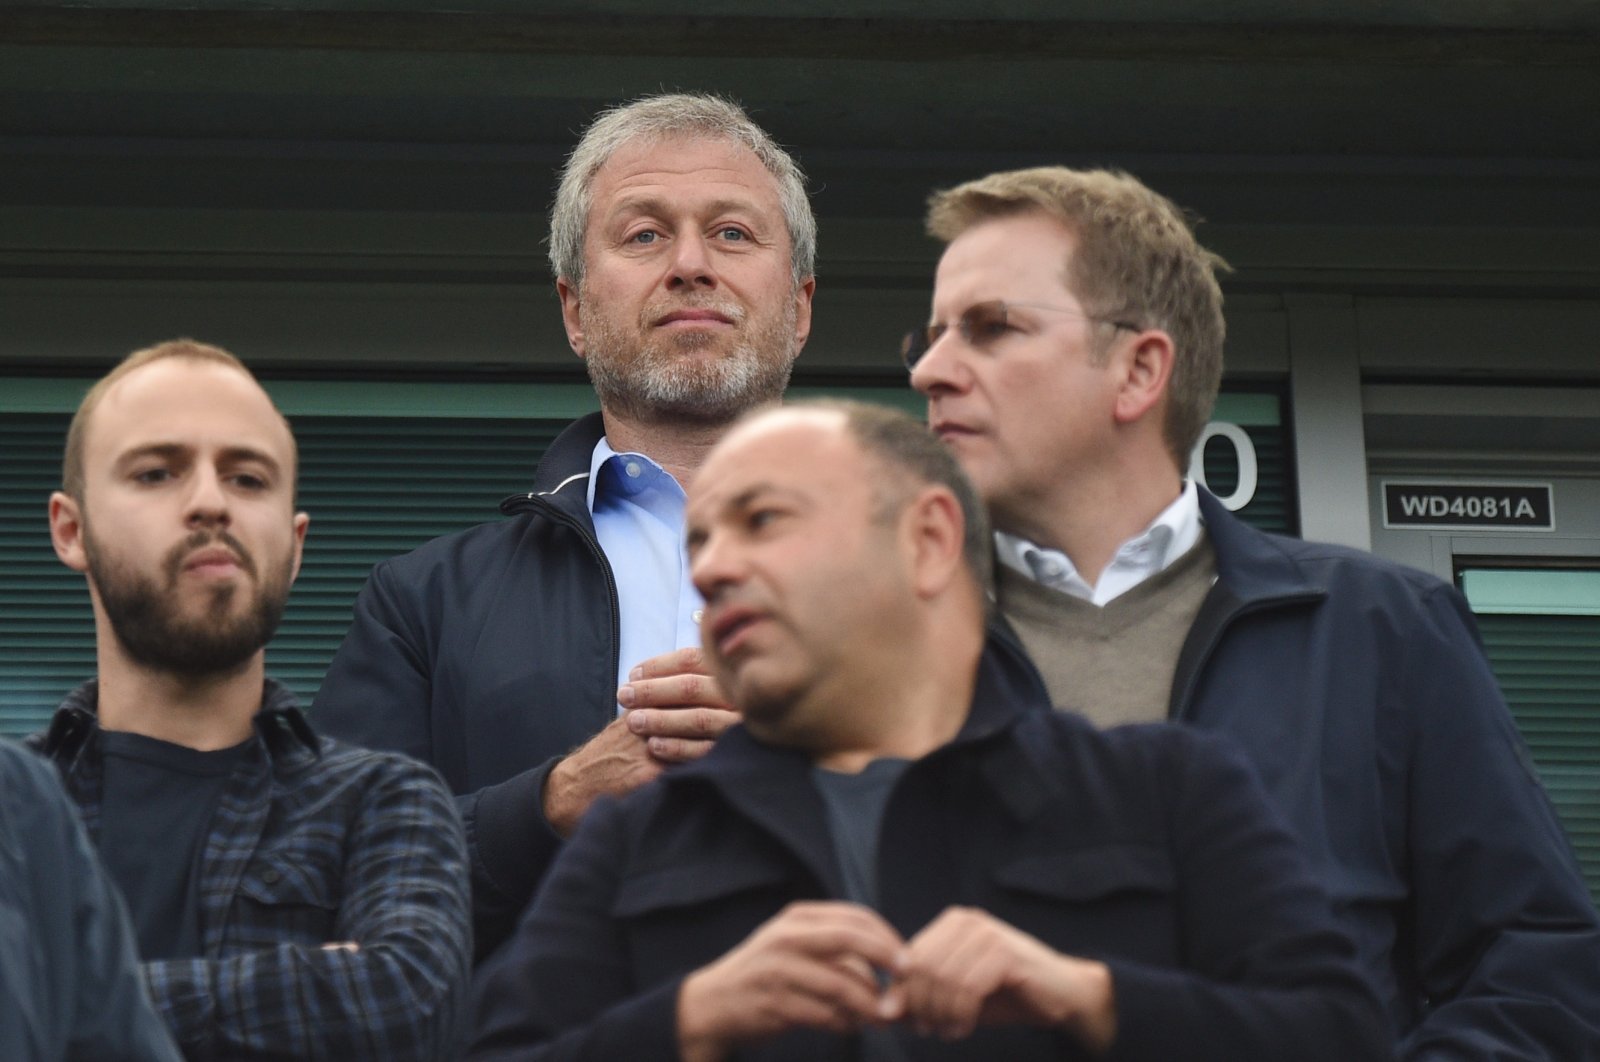 Chelsea owner Roman Abramovich (top C) watches during the English Premier League football match between Chelsea FC and Sunderland at Stamford Bridge in London, Britain, May 21, 2017. (EPA Photo)